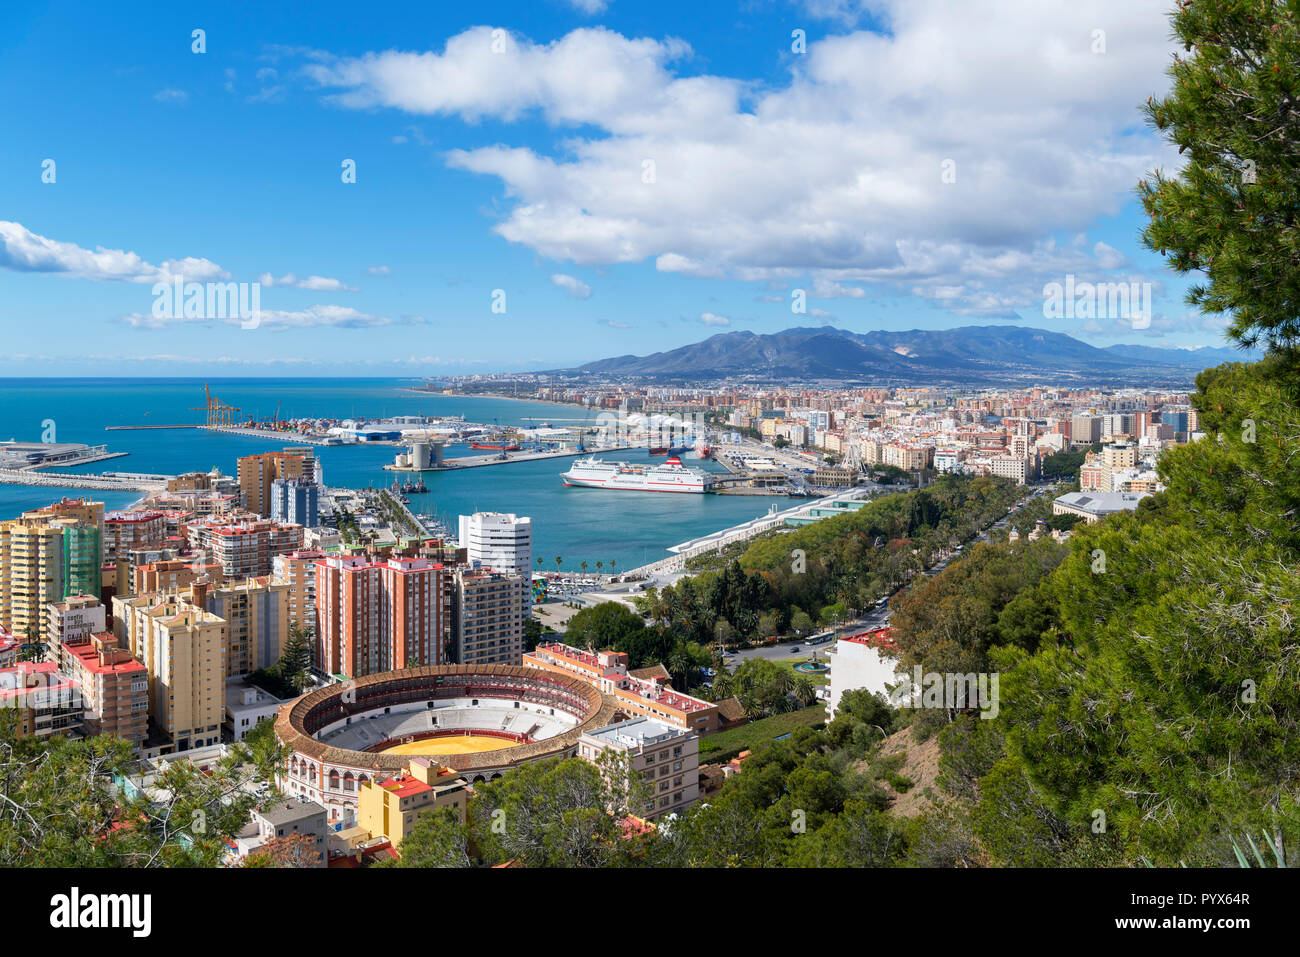 Malaga, Spain. View over the city from the Castillo Gibralfaro with the Bull Ring in the foreground, Malaga, Costa del Sol, Andalucia, Spain Stock Photo